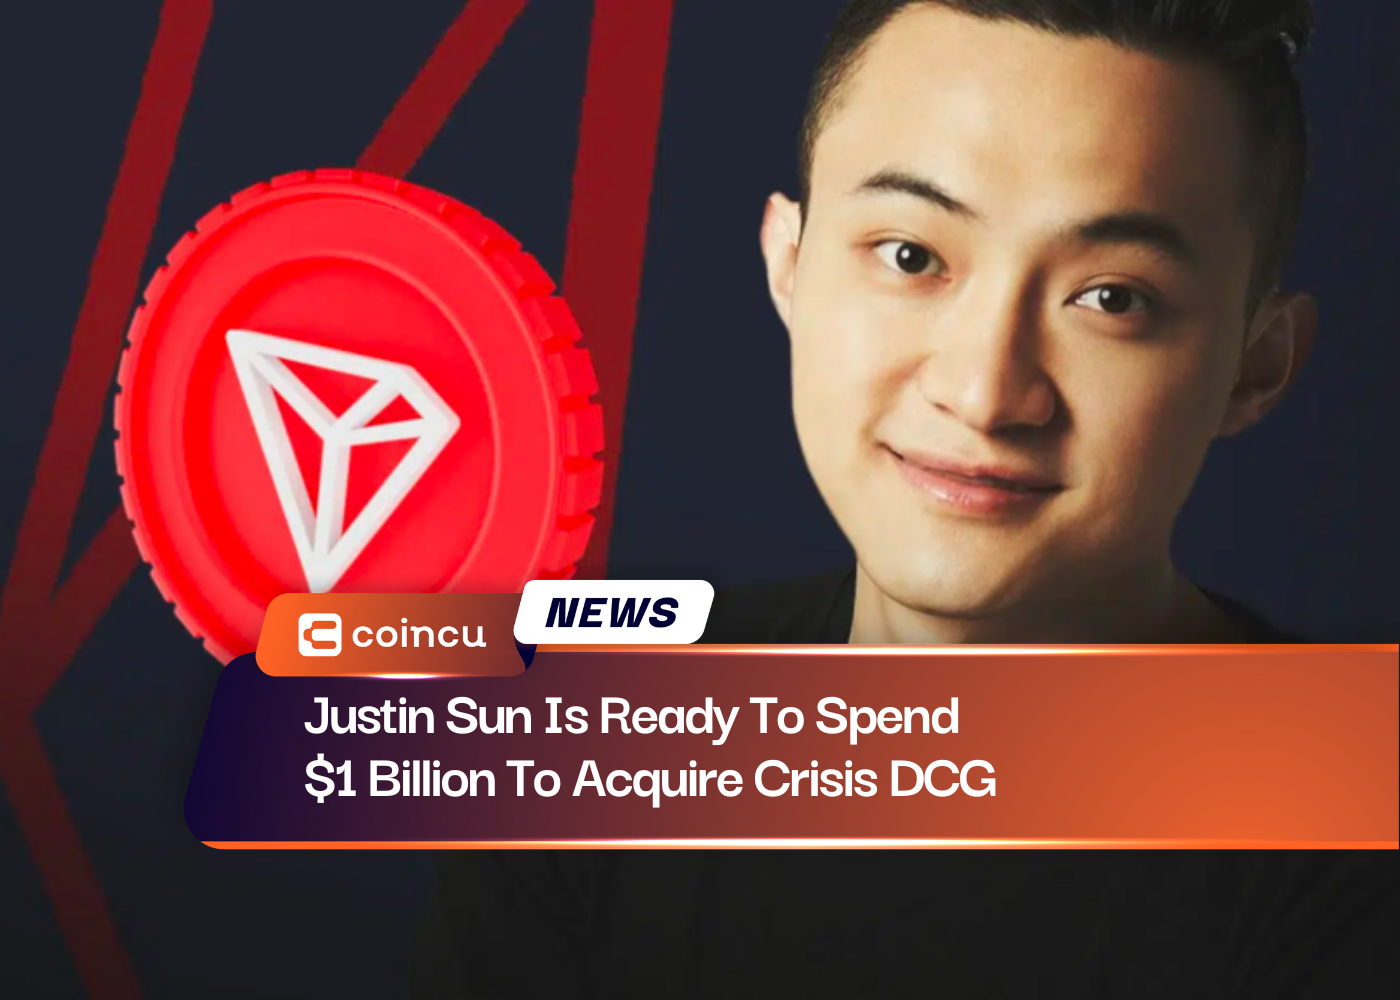 Justin Sun Is Ready To Spend $1 Billion To Acquire Crisis DCG